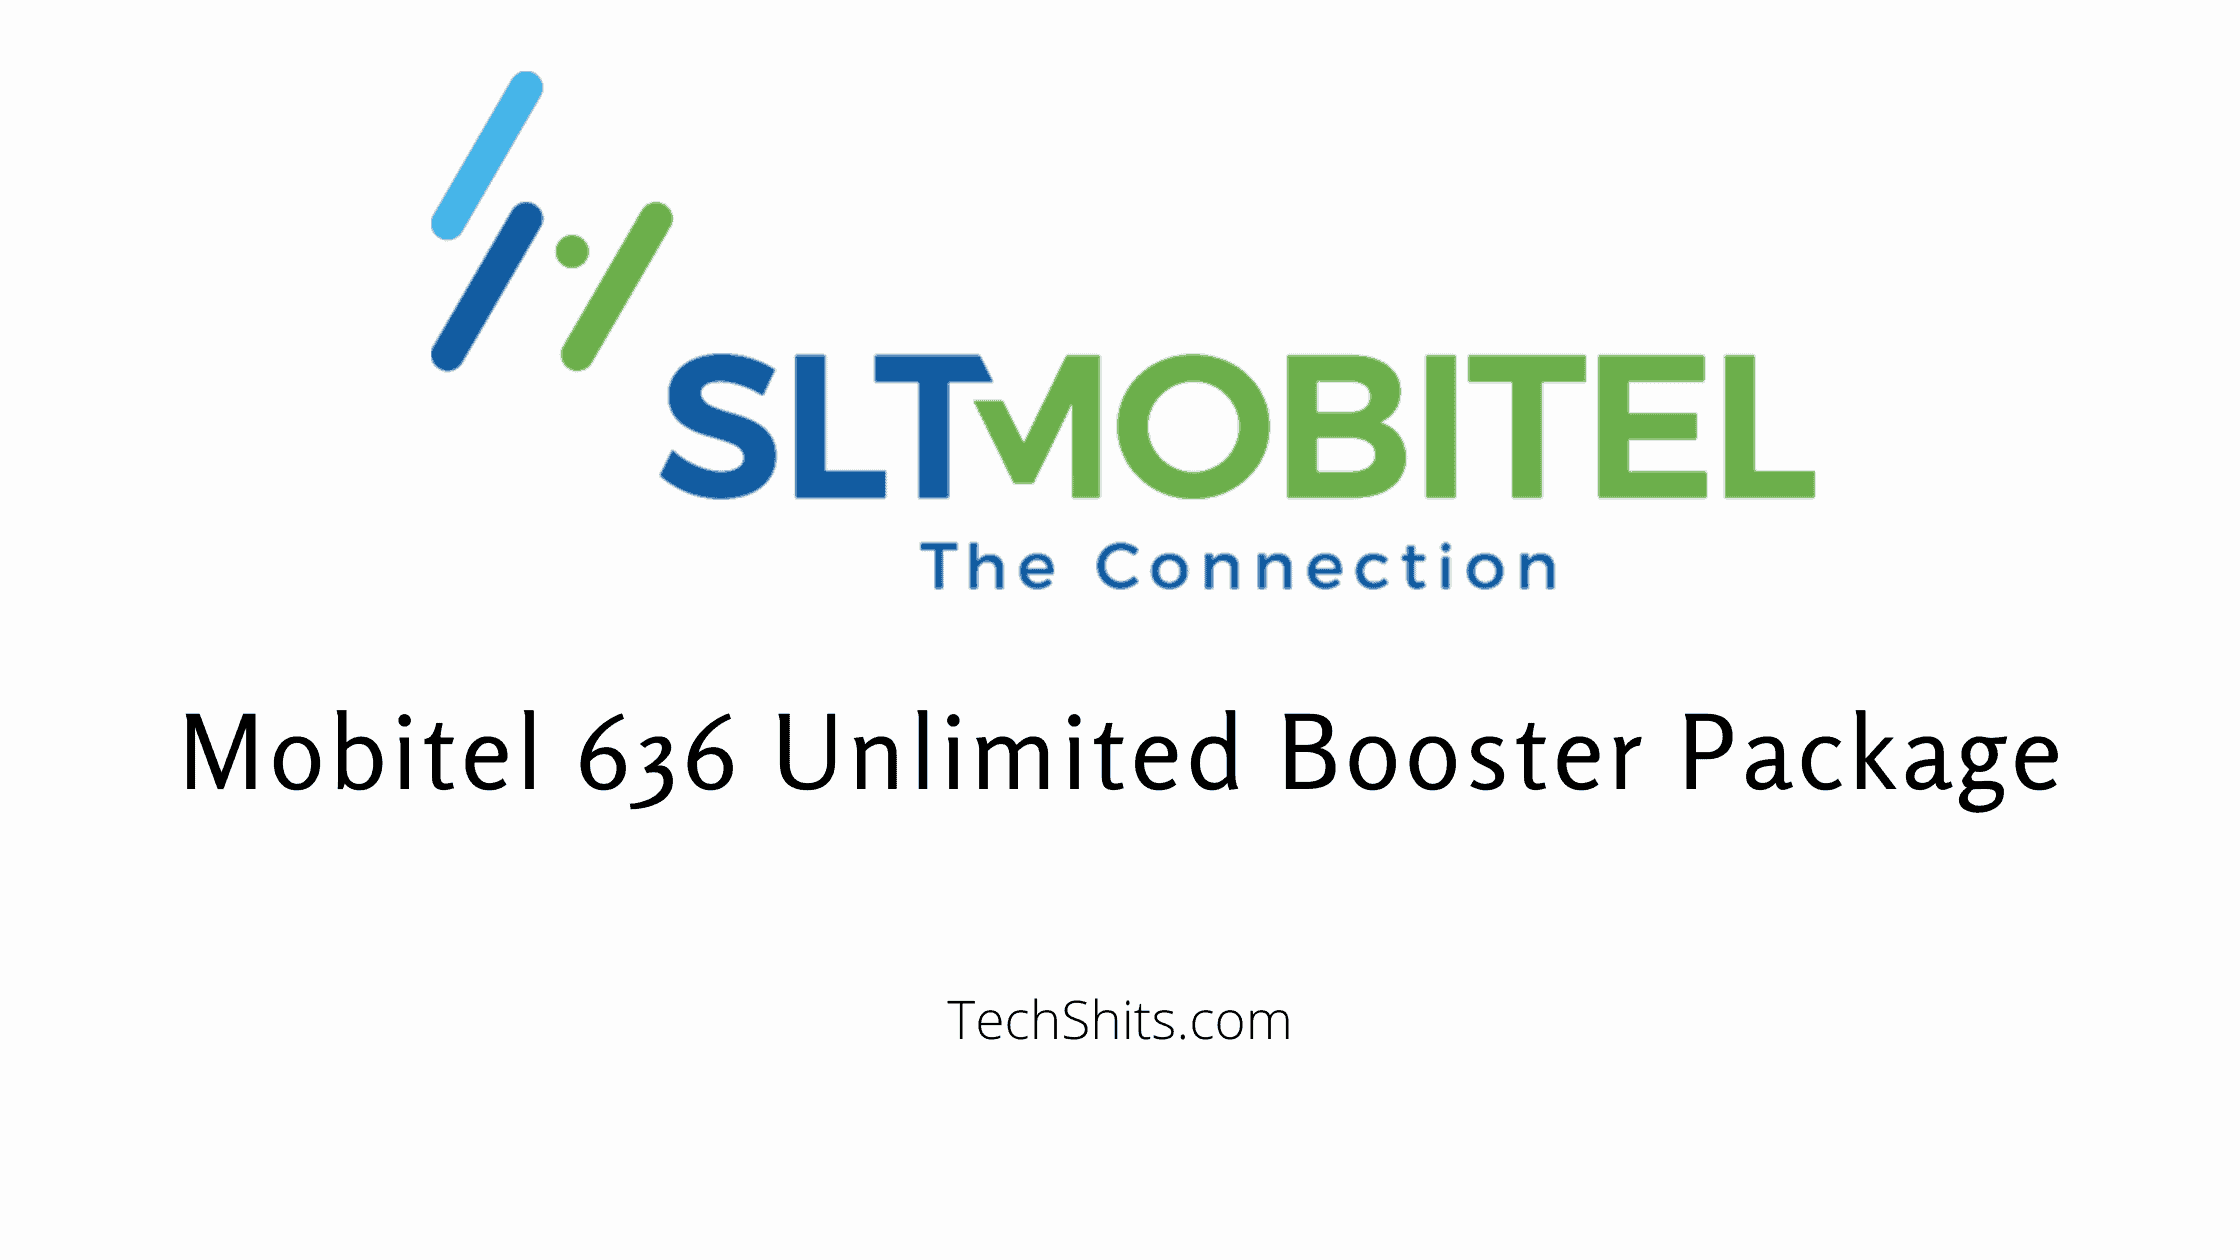 Mobitel 636 Unlimited Booster Package Details